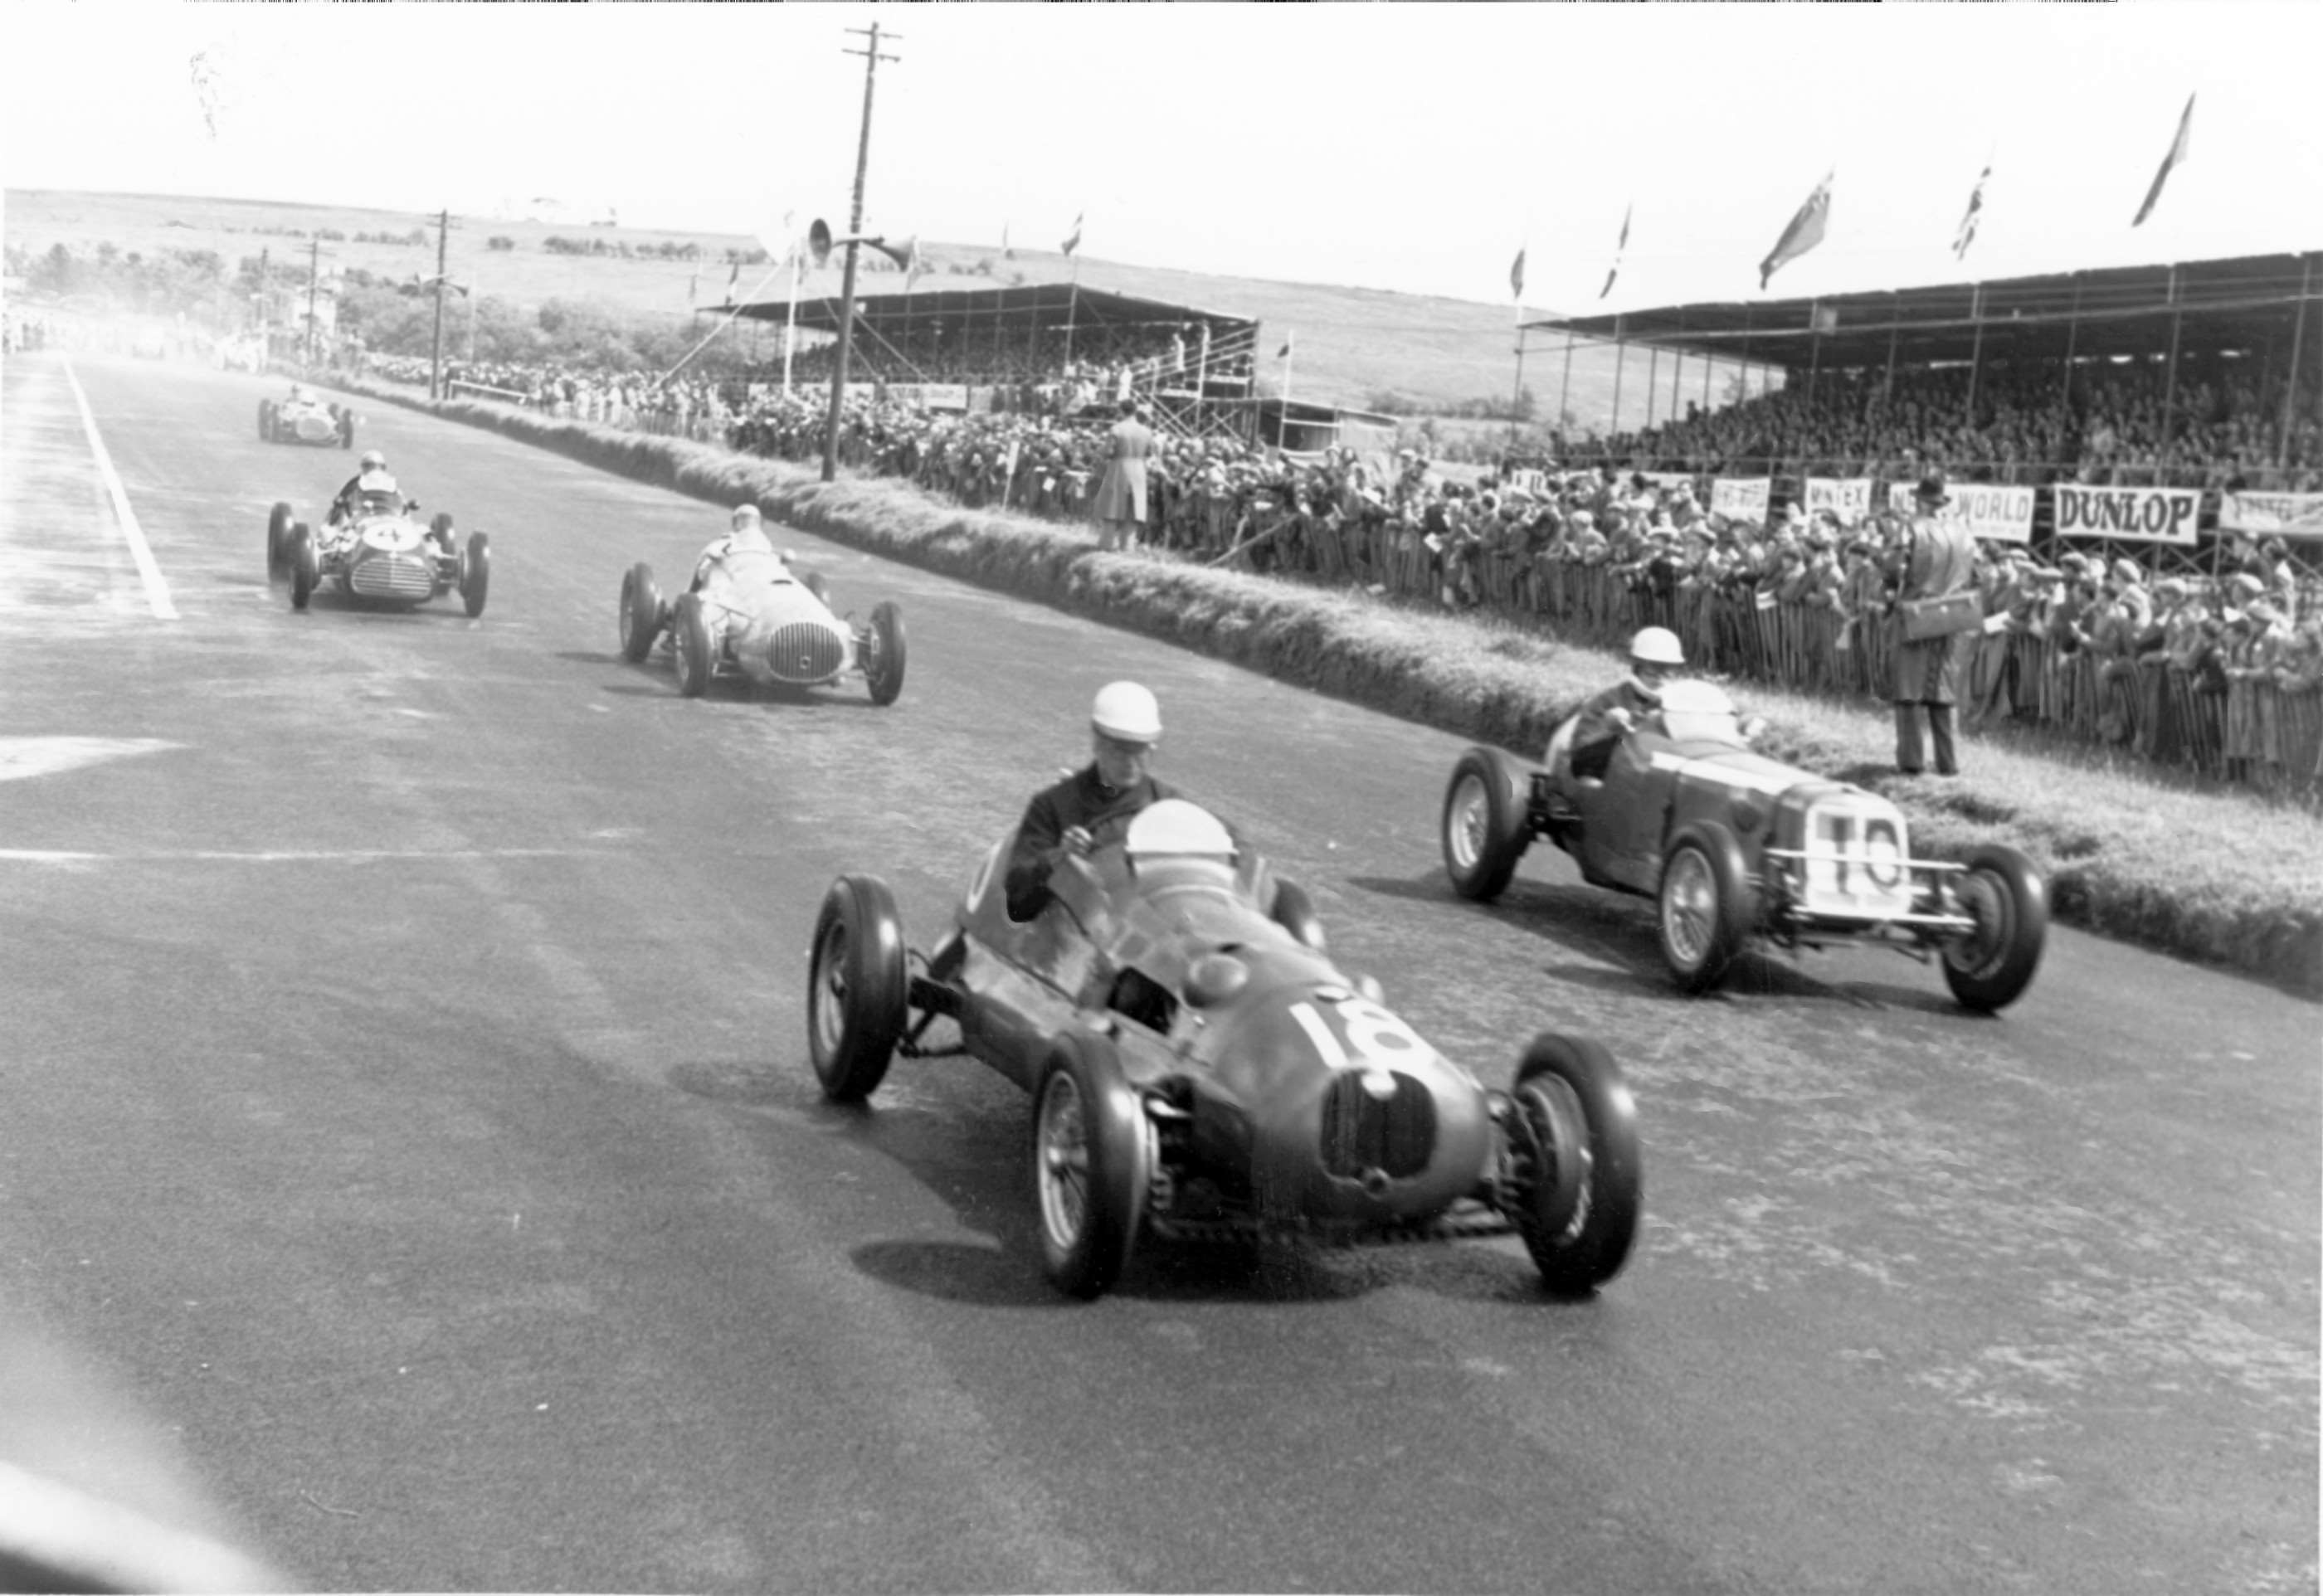 1952 Ulster Trophy, Dundrod - one-offs take the start - Bobby Baird in the Baird-Griffin (left) - Prince ‘Bira’ in his OSCA V12 - Geoff Richardson in his RRA (No 18) - with Ron Flockhart in the ‘common’ ERA at right...